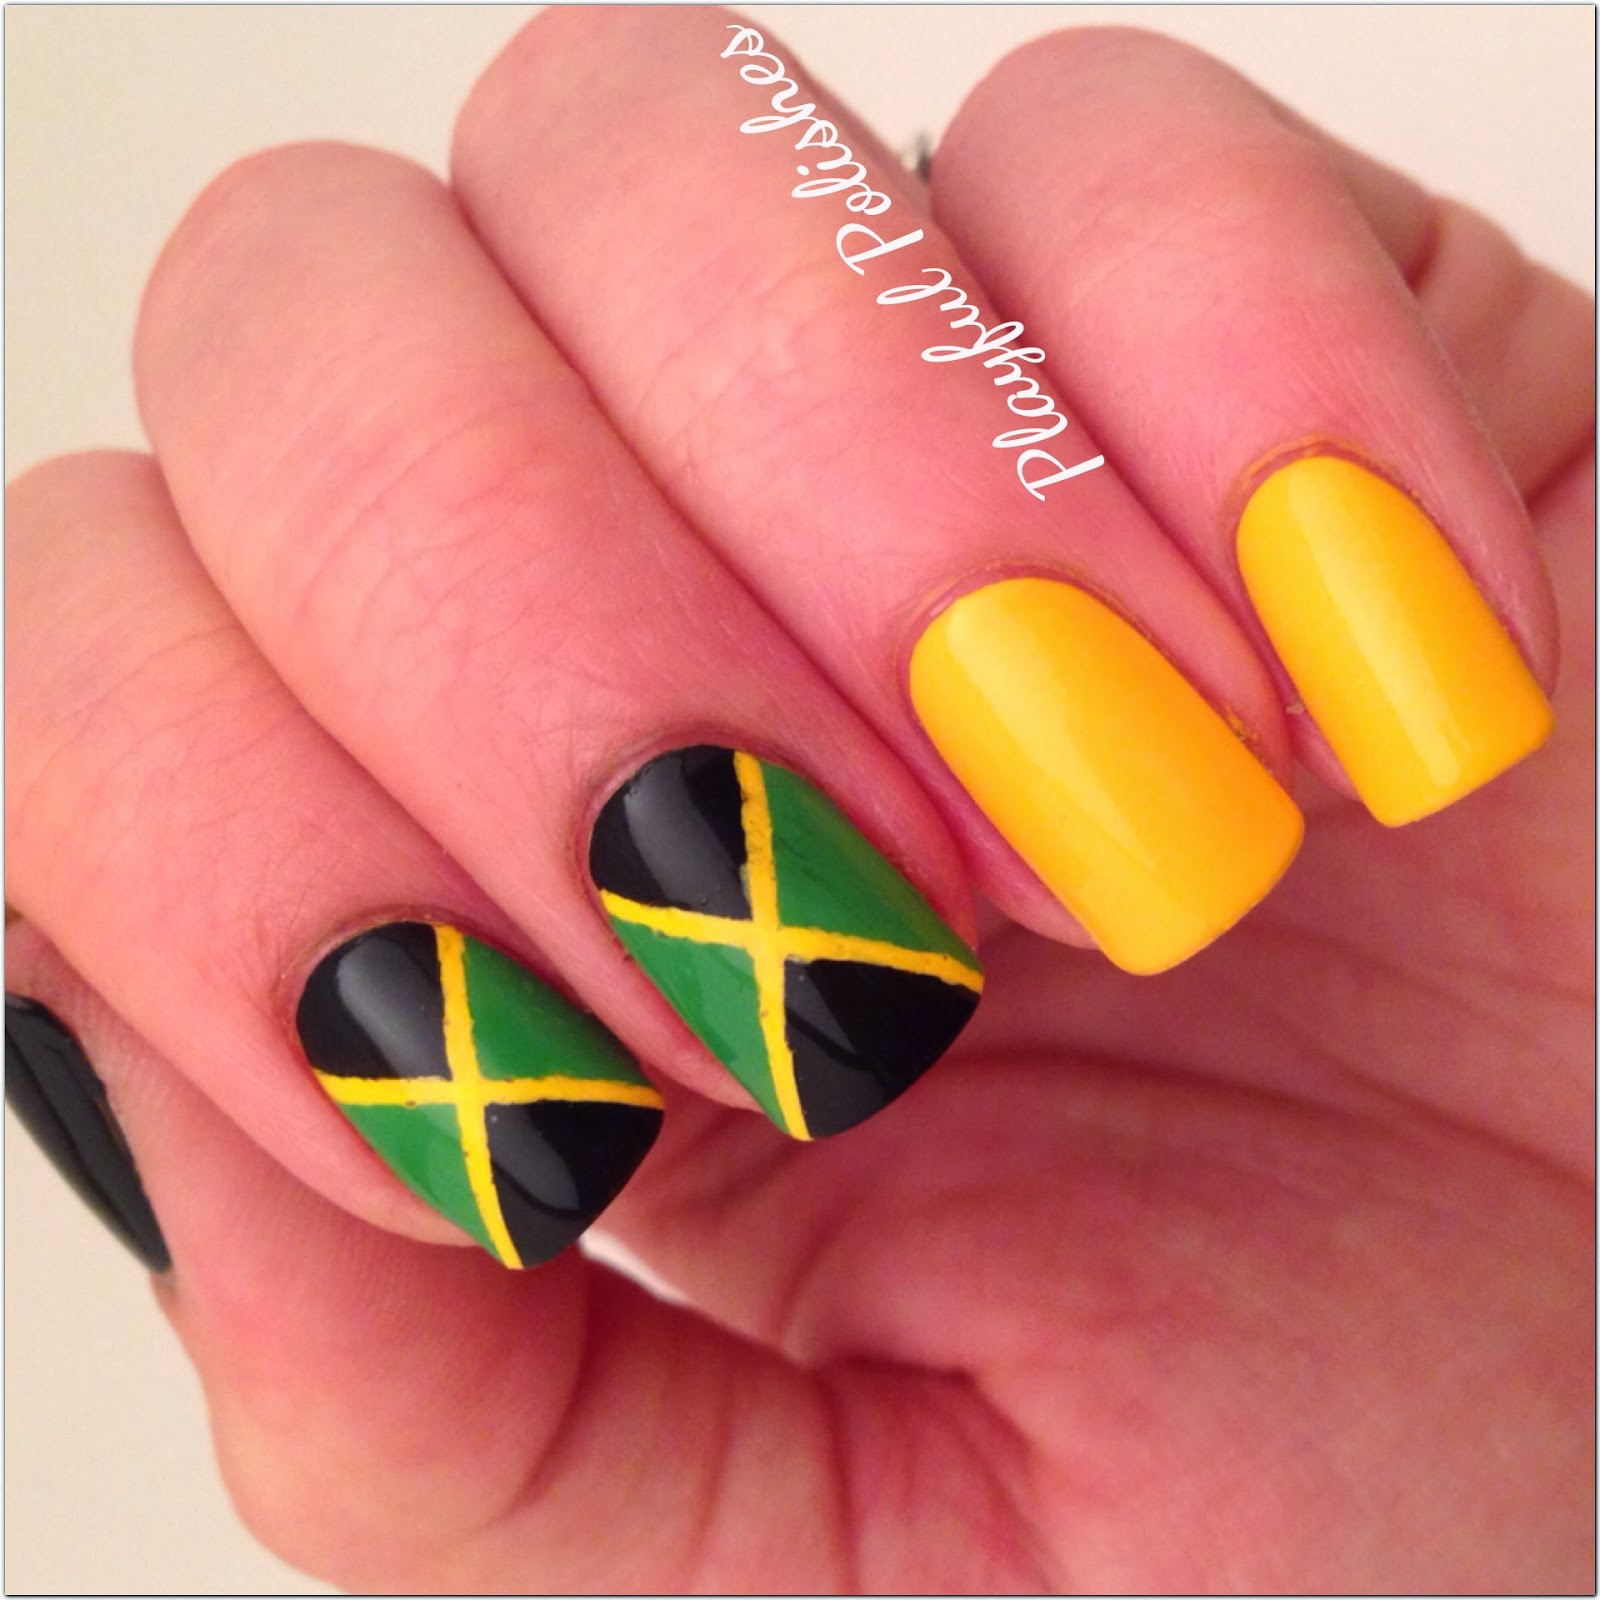 Jamaican Nail Designs
 Playful Polishes 31 DAY NAIL ART CHALLENGE INSPIRED BY A